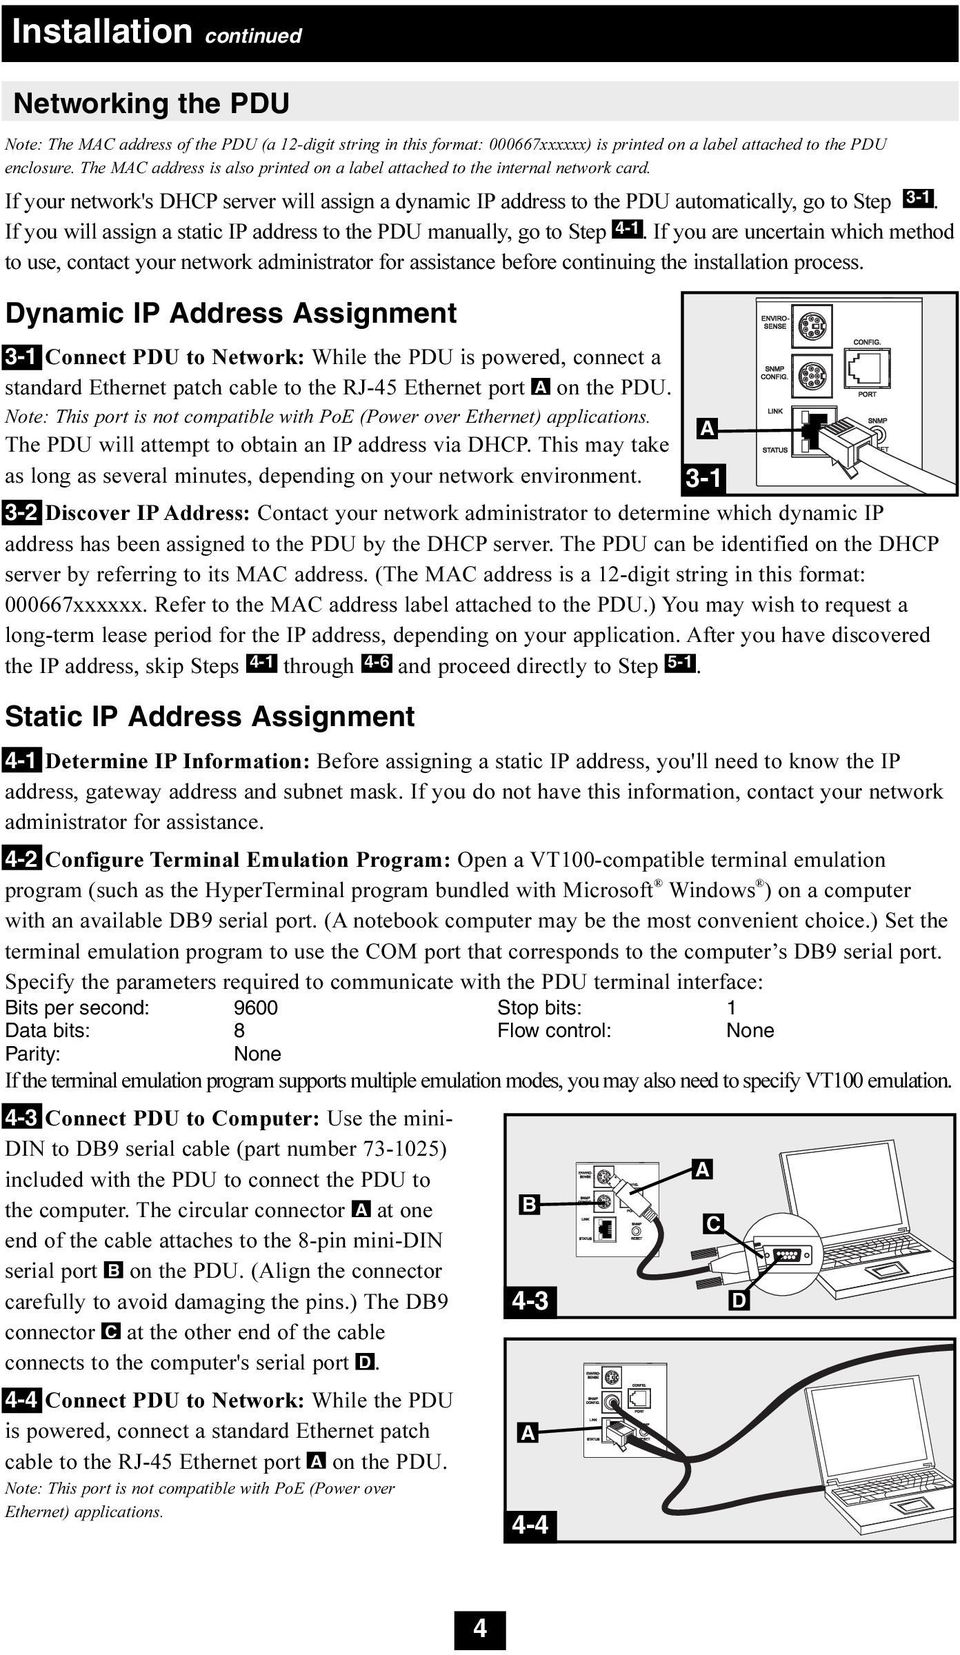 If you will assign a static IP address to the PDU manually, go to Step 4-1.